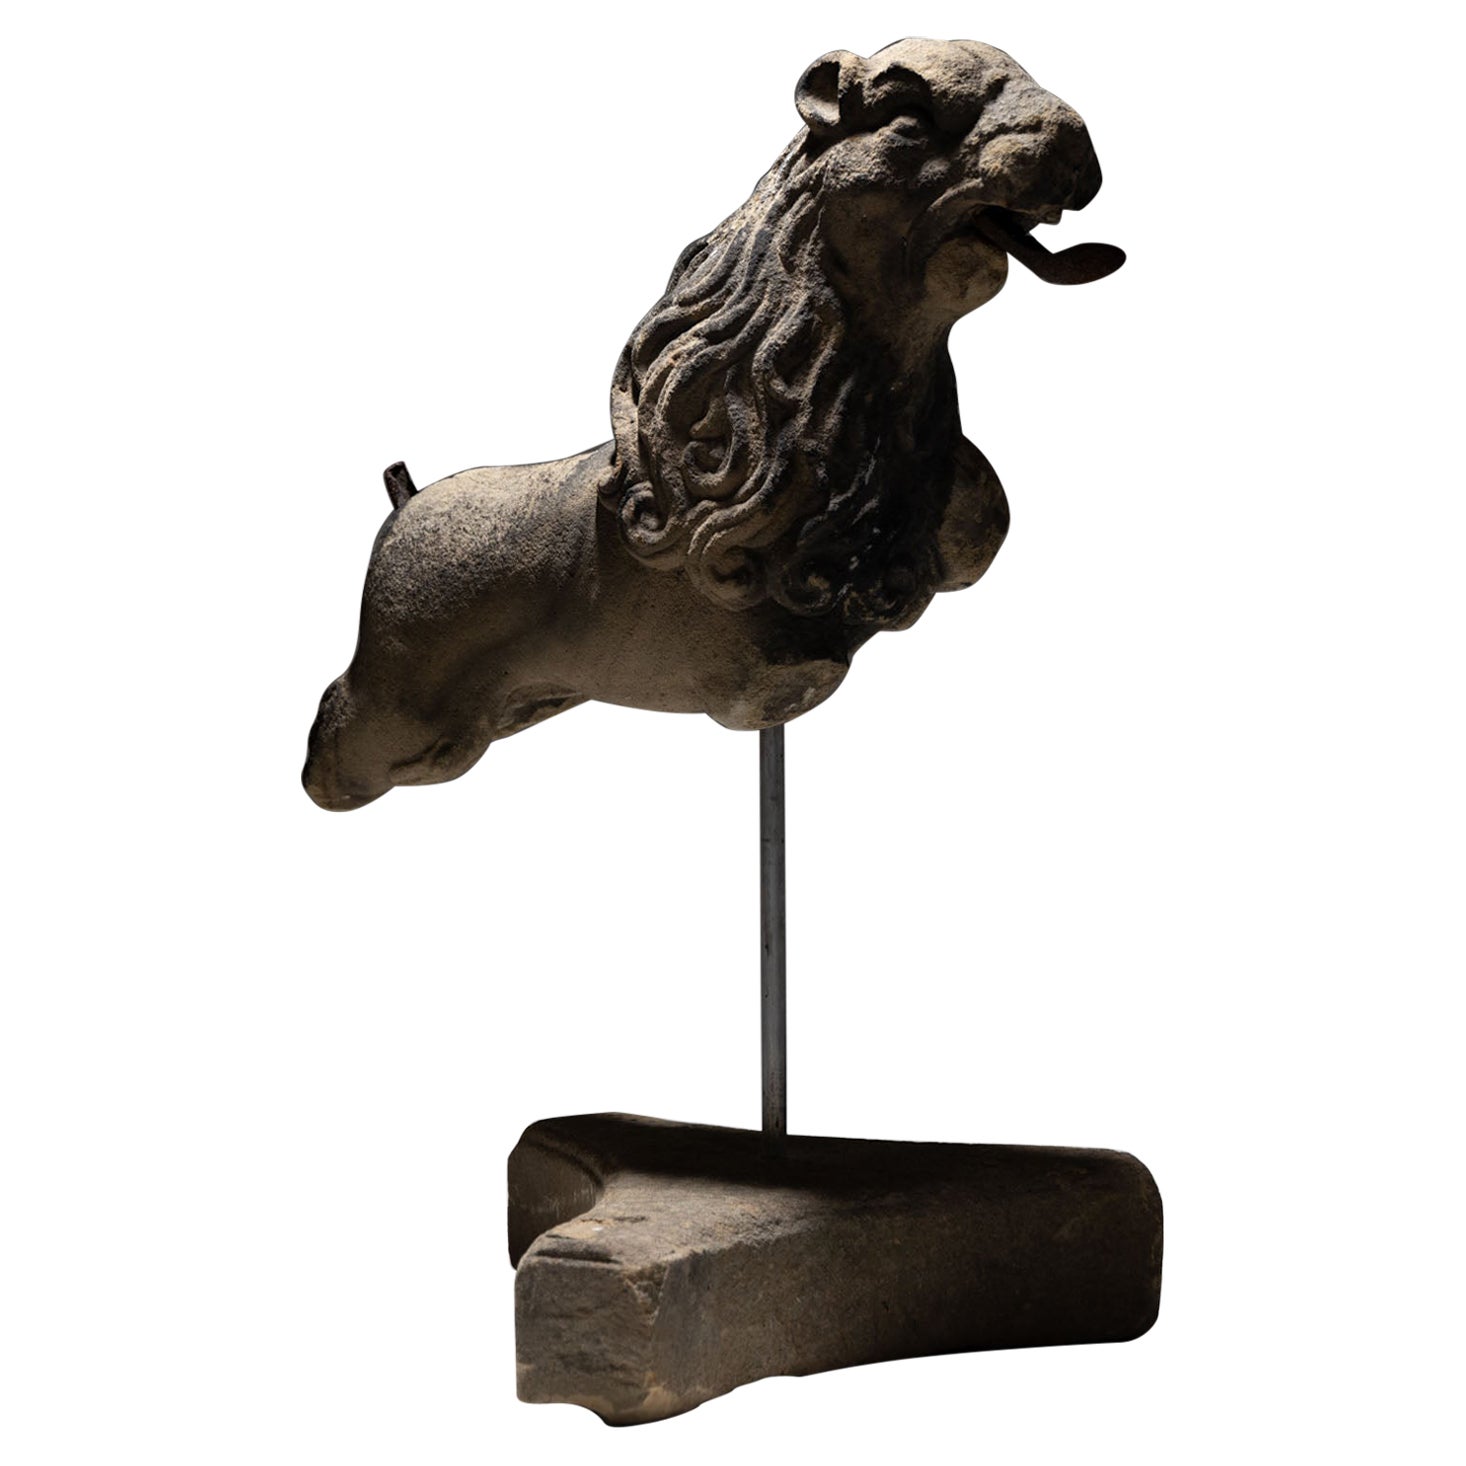 Fragment of a Lion made of Sandstone, 17th Century